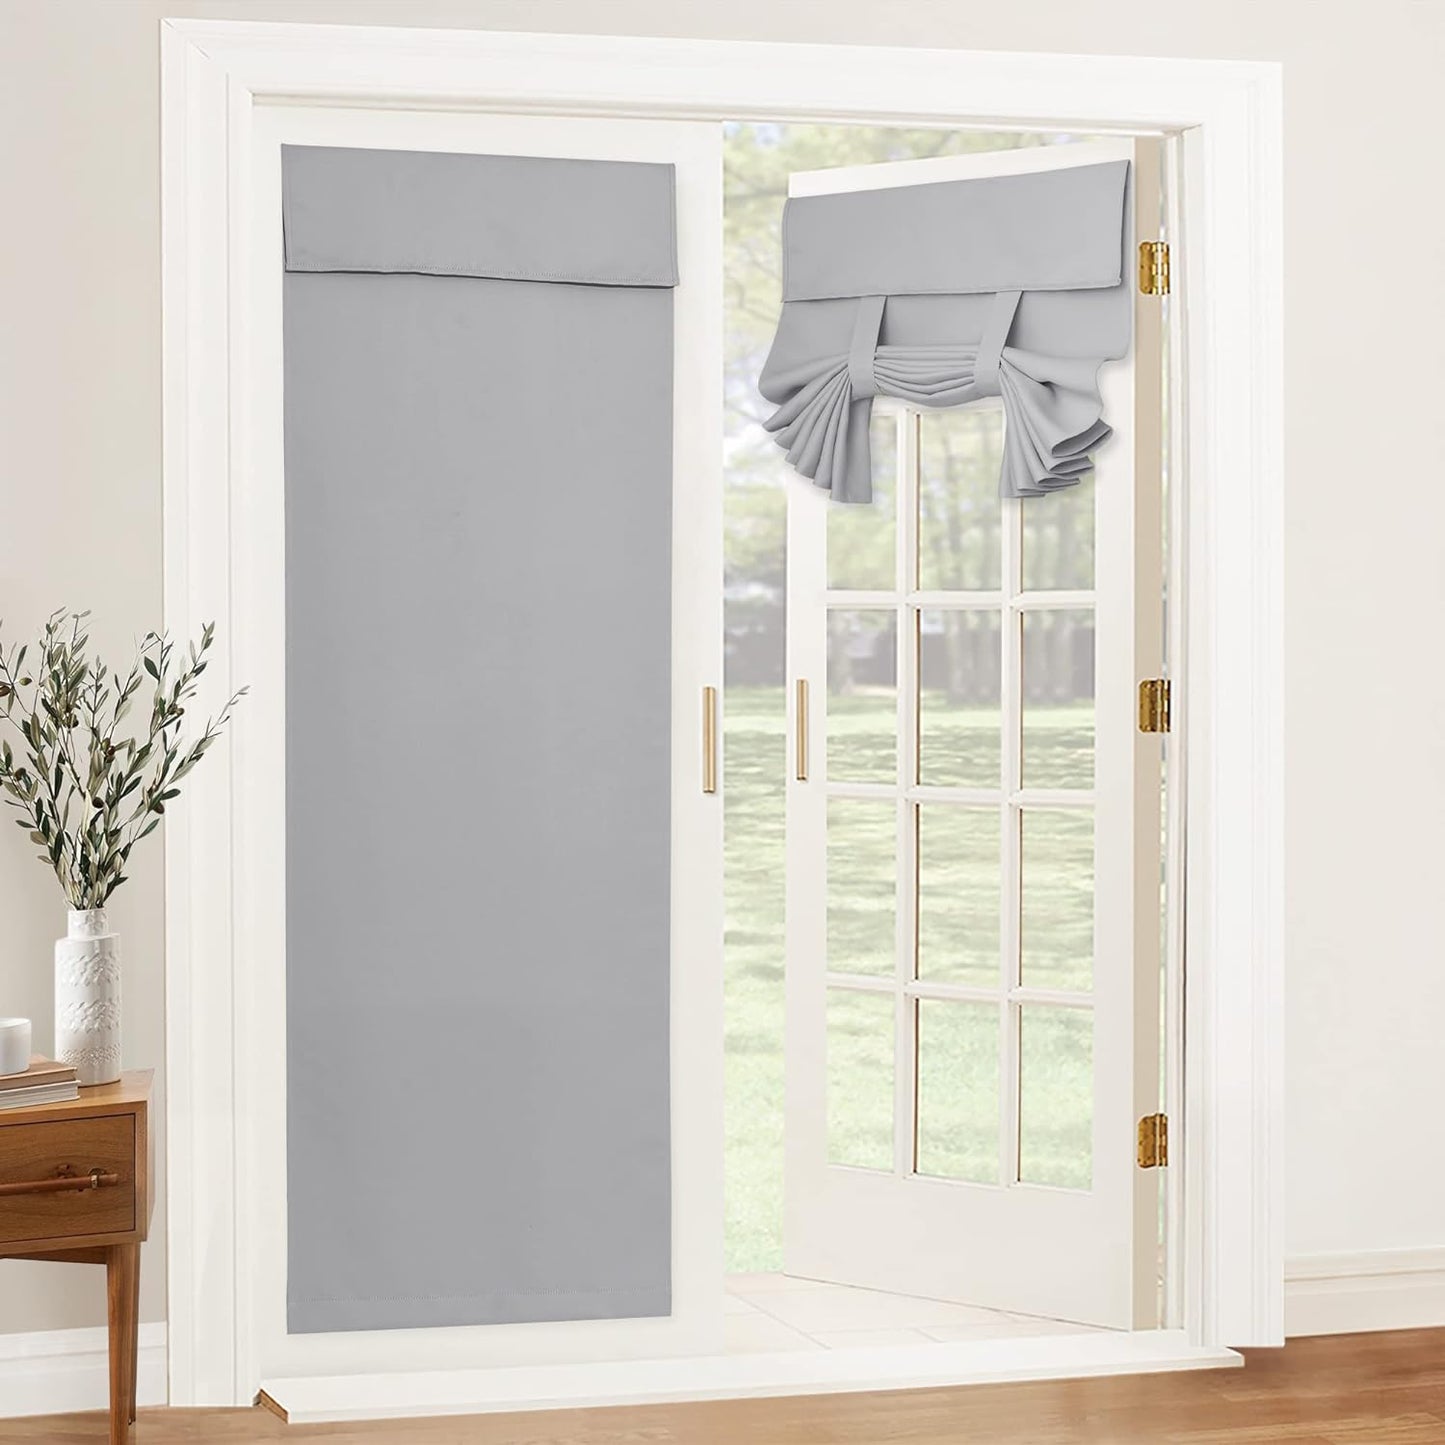 RYB HOME Blackout French Door Curtains, Room Darkening Shades Small Door Window Curtains and Drapes Thermal Insulated Tricia Door Blinds for Patio Door Doorway, W26 X L40 Inch, 1 Panel, Gray  RYB HOME Sliver Grey 36" X 80" 